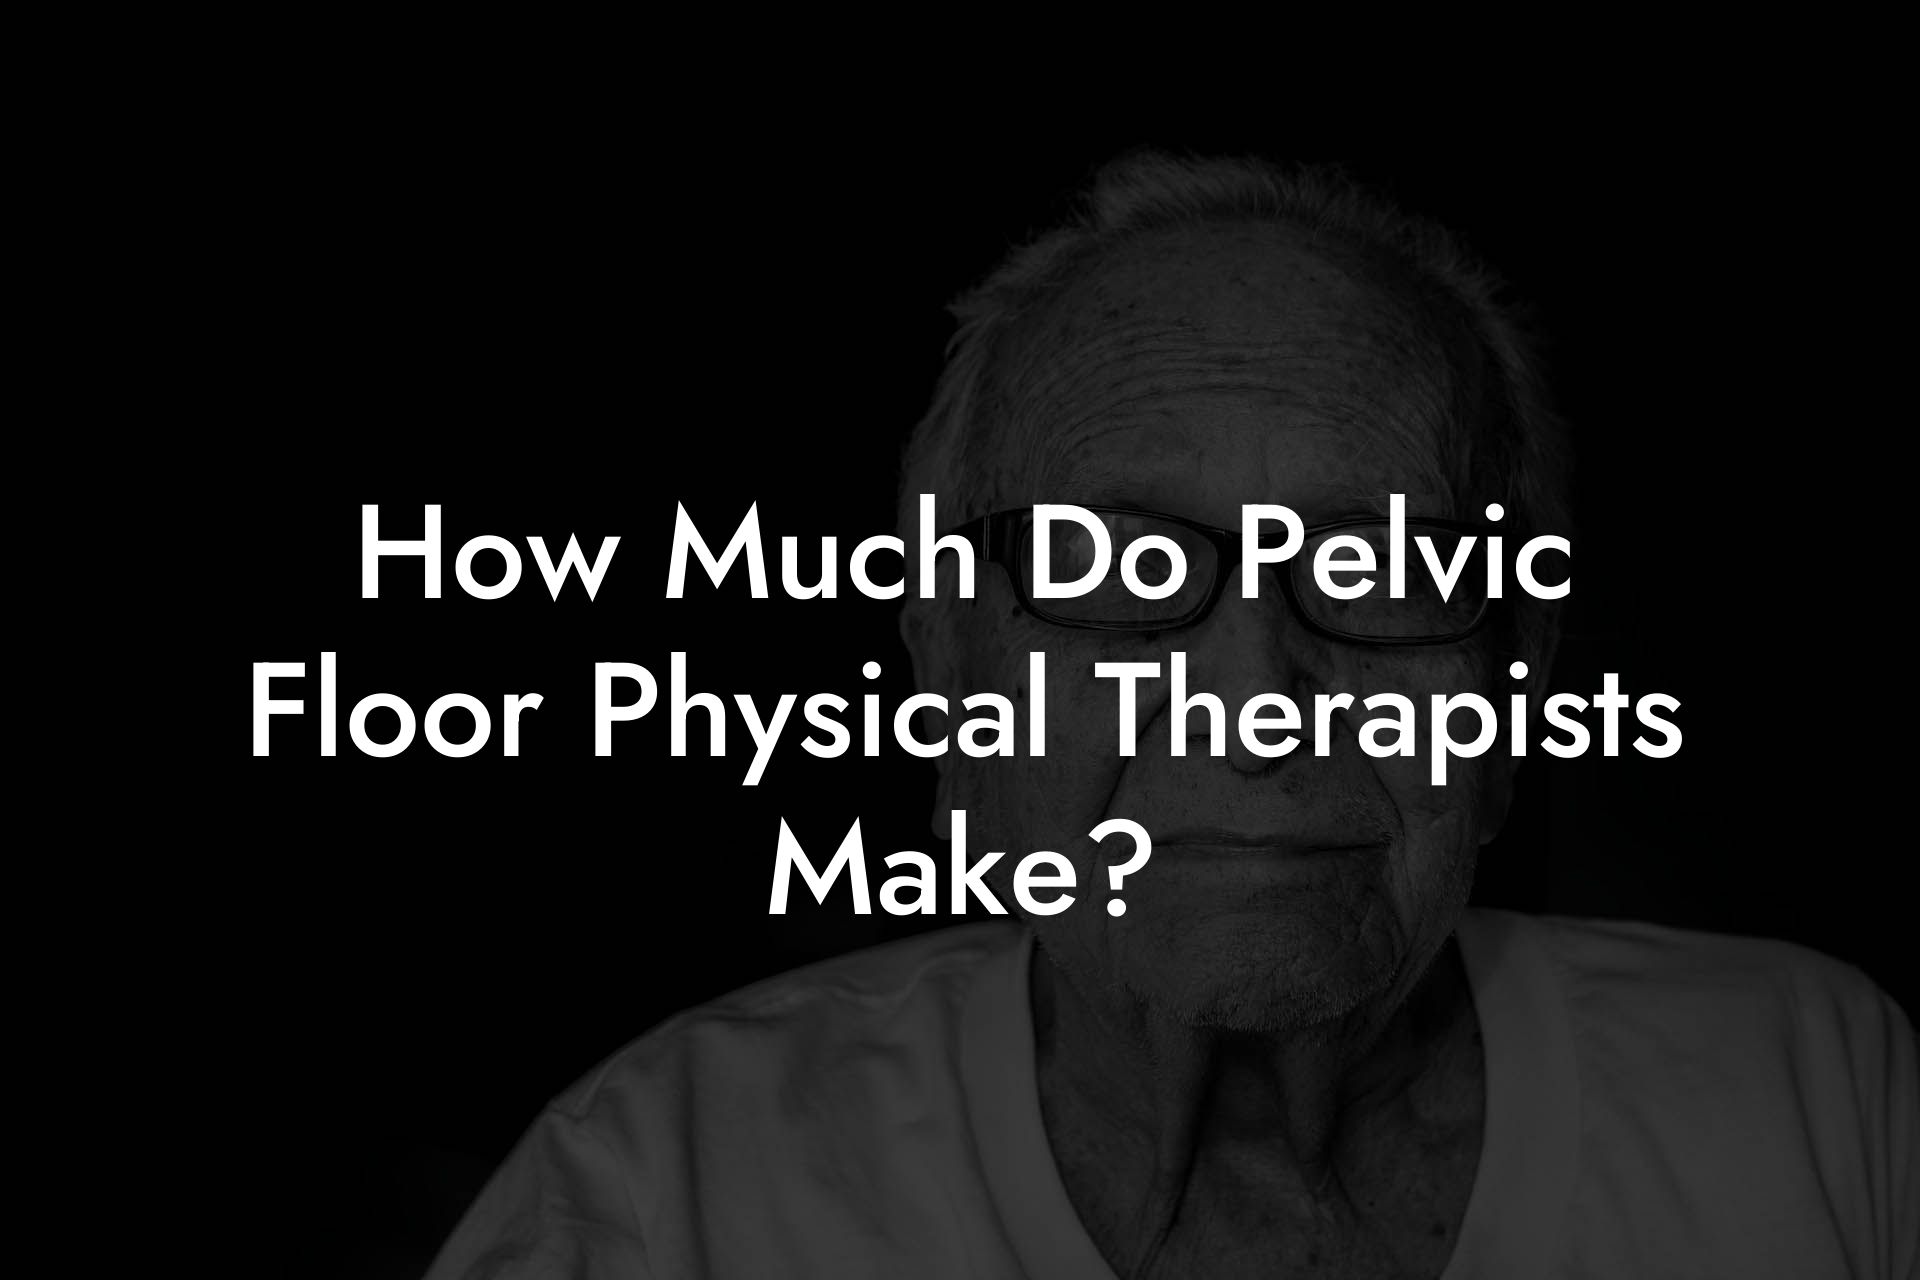 How Much Do Pelvic Floor Physical Therapists Make?